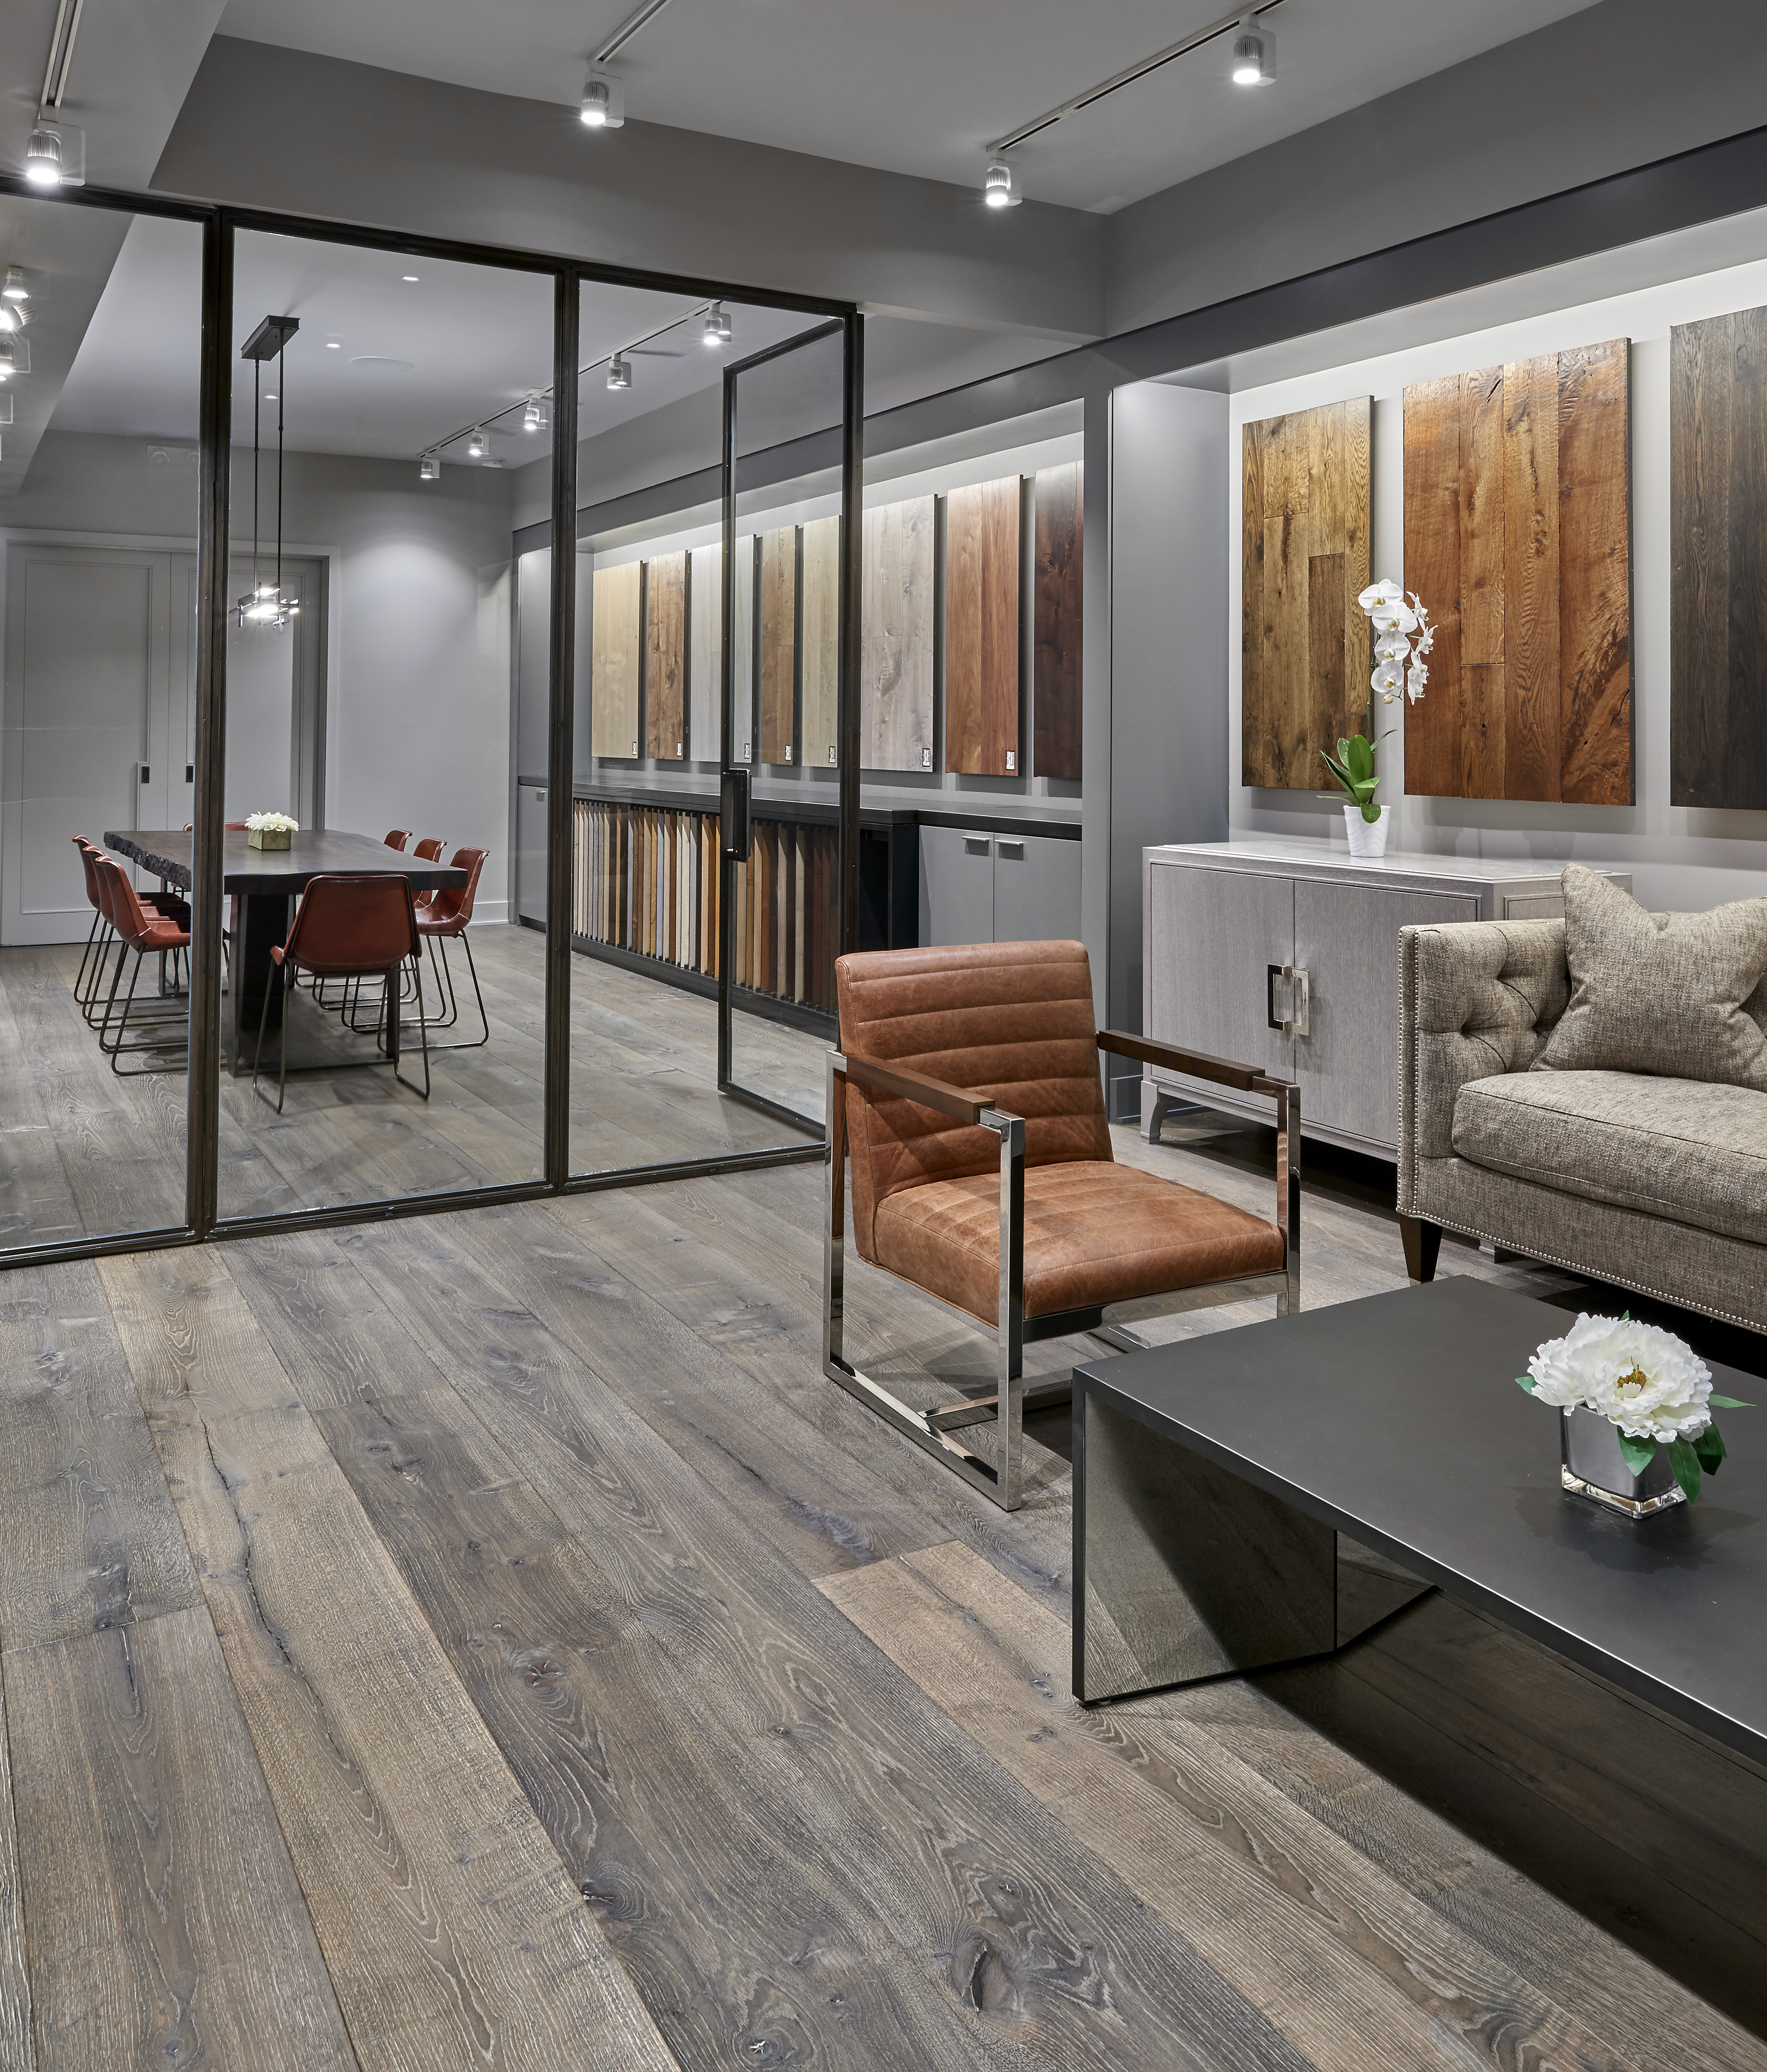 Apex Wood Floors Opens New Showroom And Design Center In Downtown Chicago Newswire